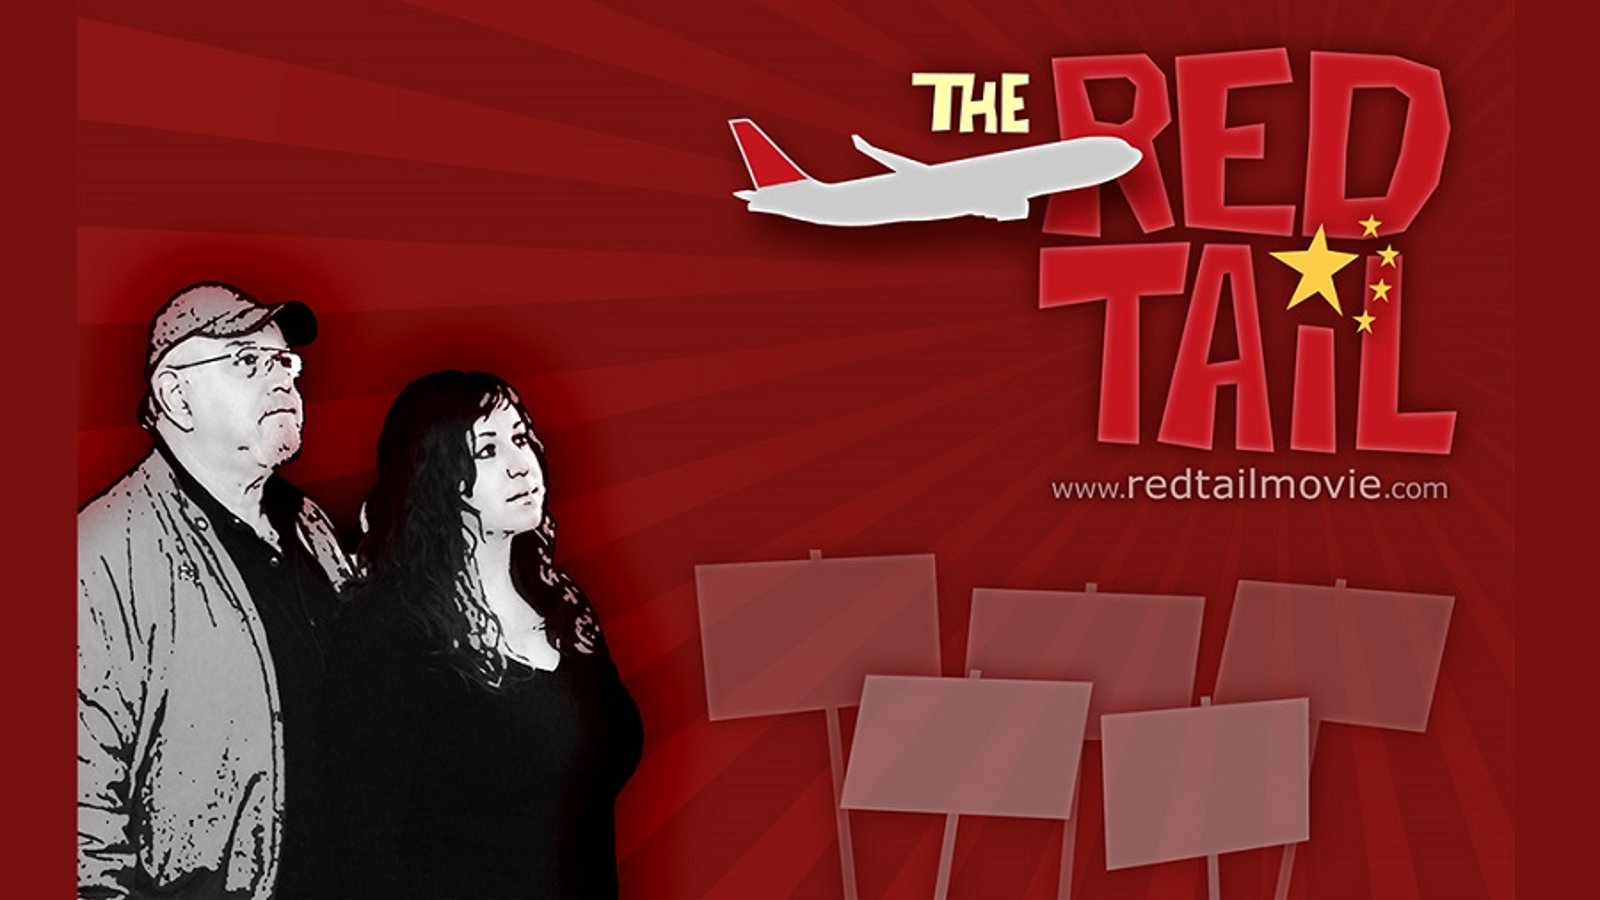 The Red Tail - The Downfall of Northwest Airlines